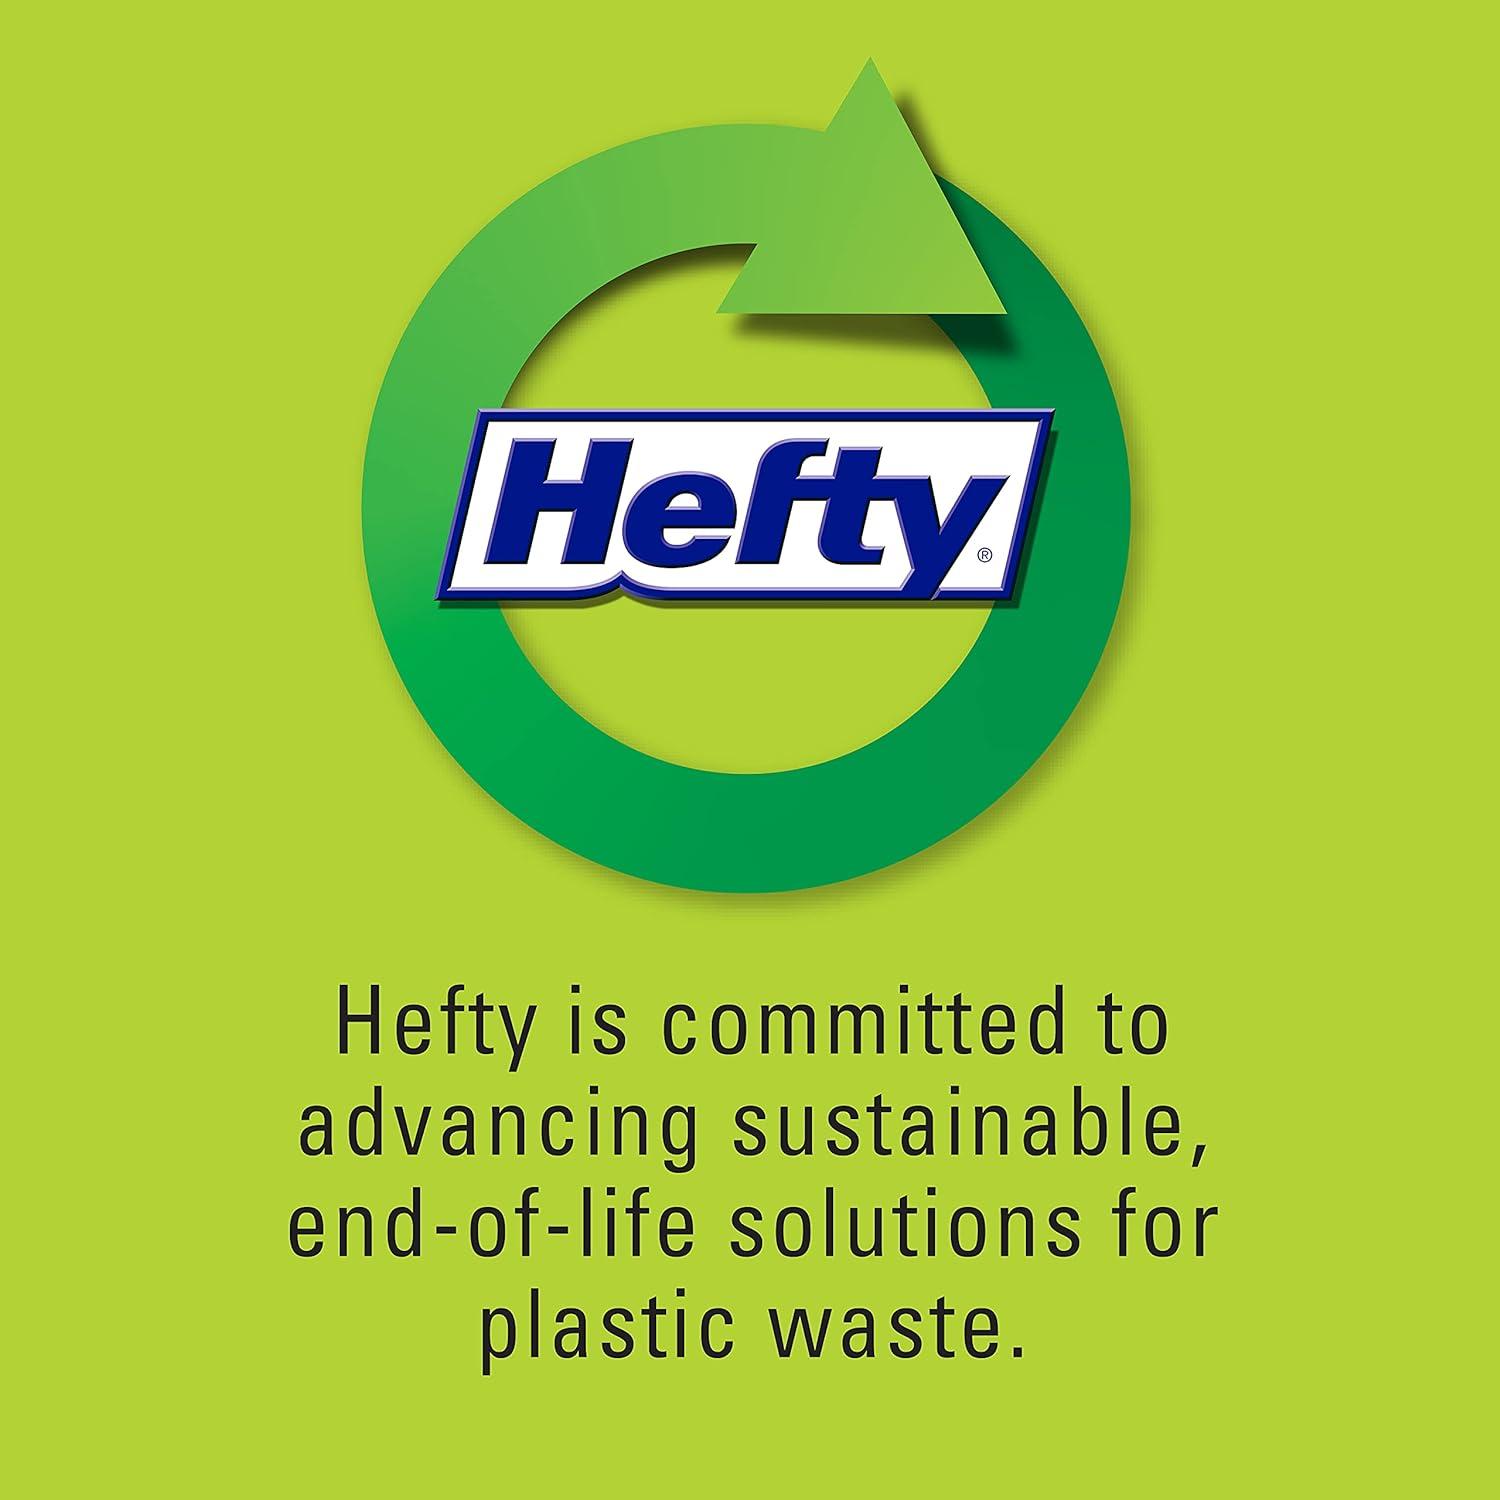  Hefty Ultra Strong Multipurpose Large Trash Bags, Black,  Fabuloso Scent, 30 Gallon, 50 Count : Health & Household